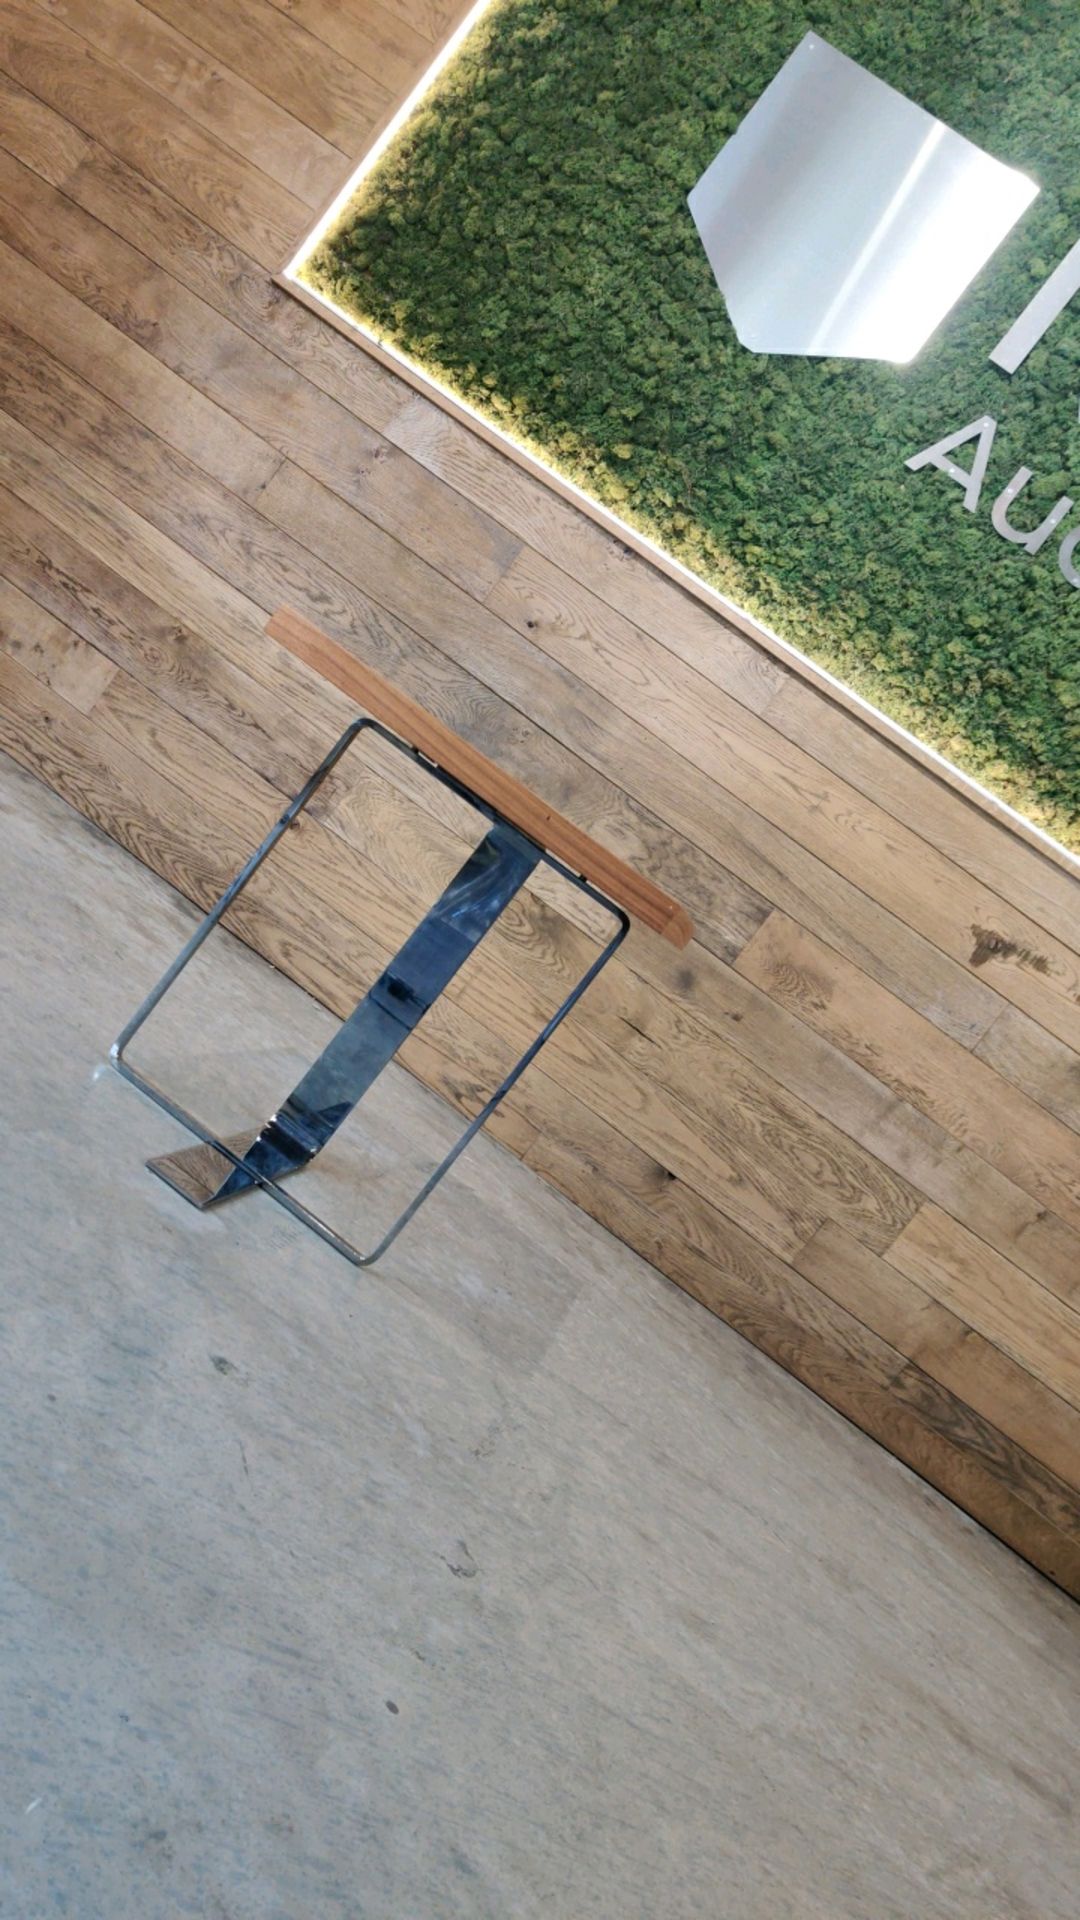 Porada Square Wooden Table With Metal Legs And Frame - Image 3 of 5